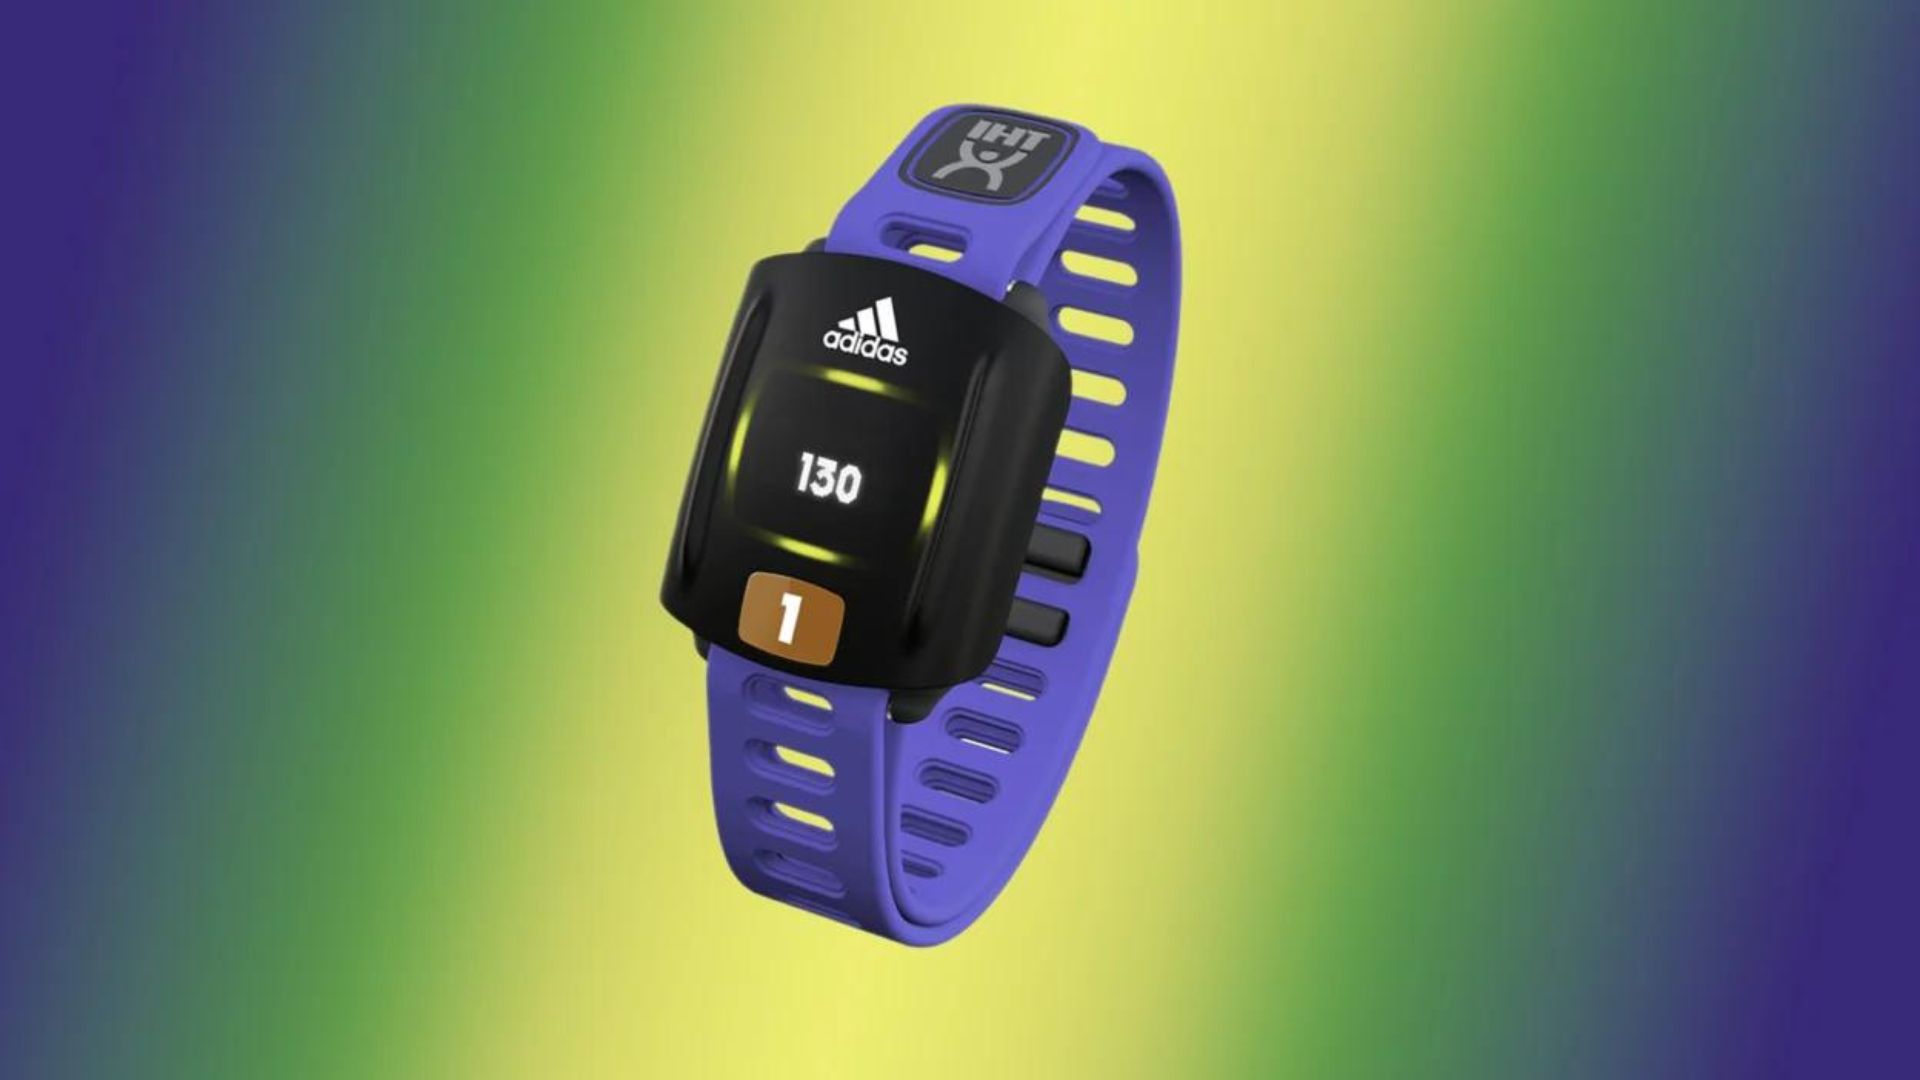 A Purple Fitness Watch From Adidas 